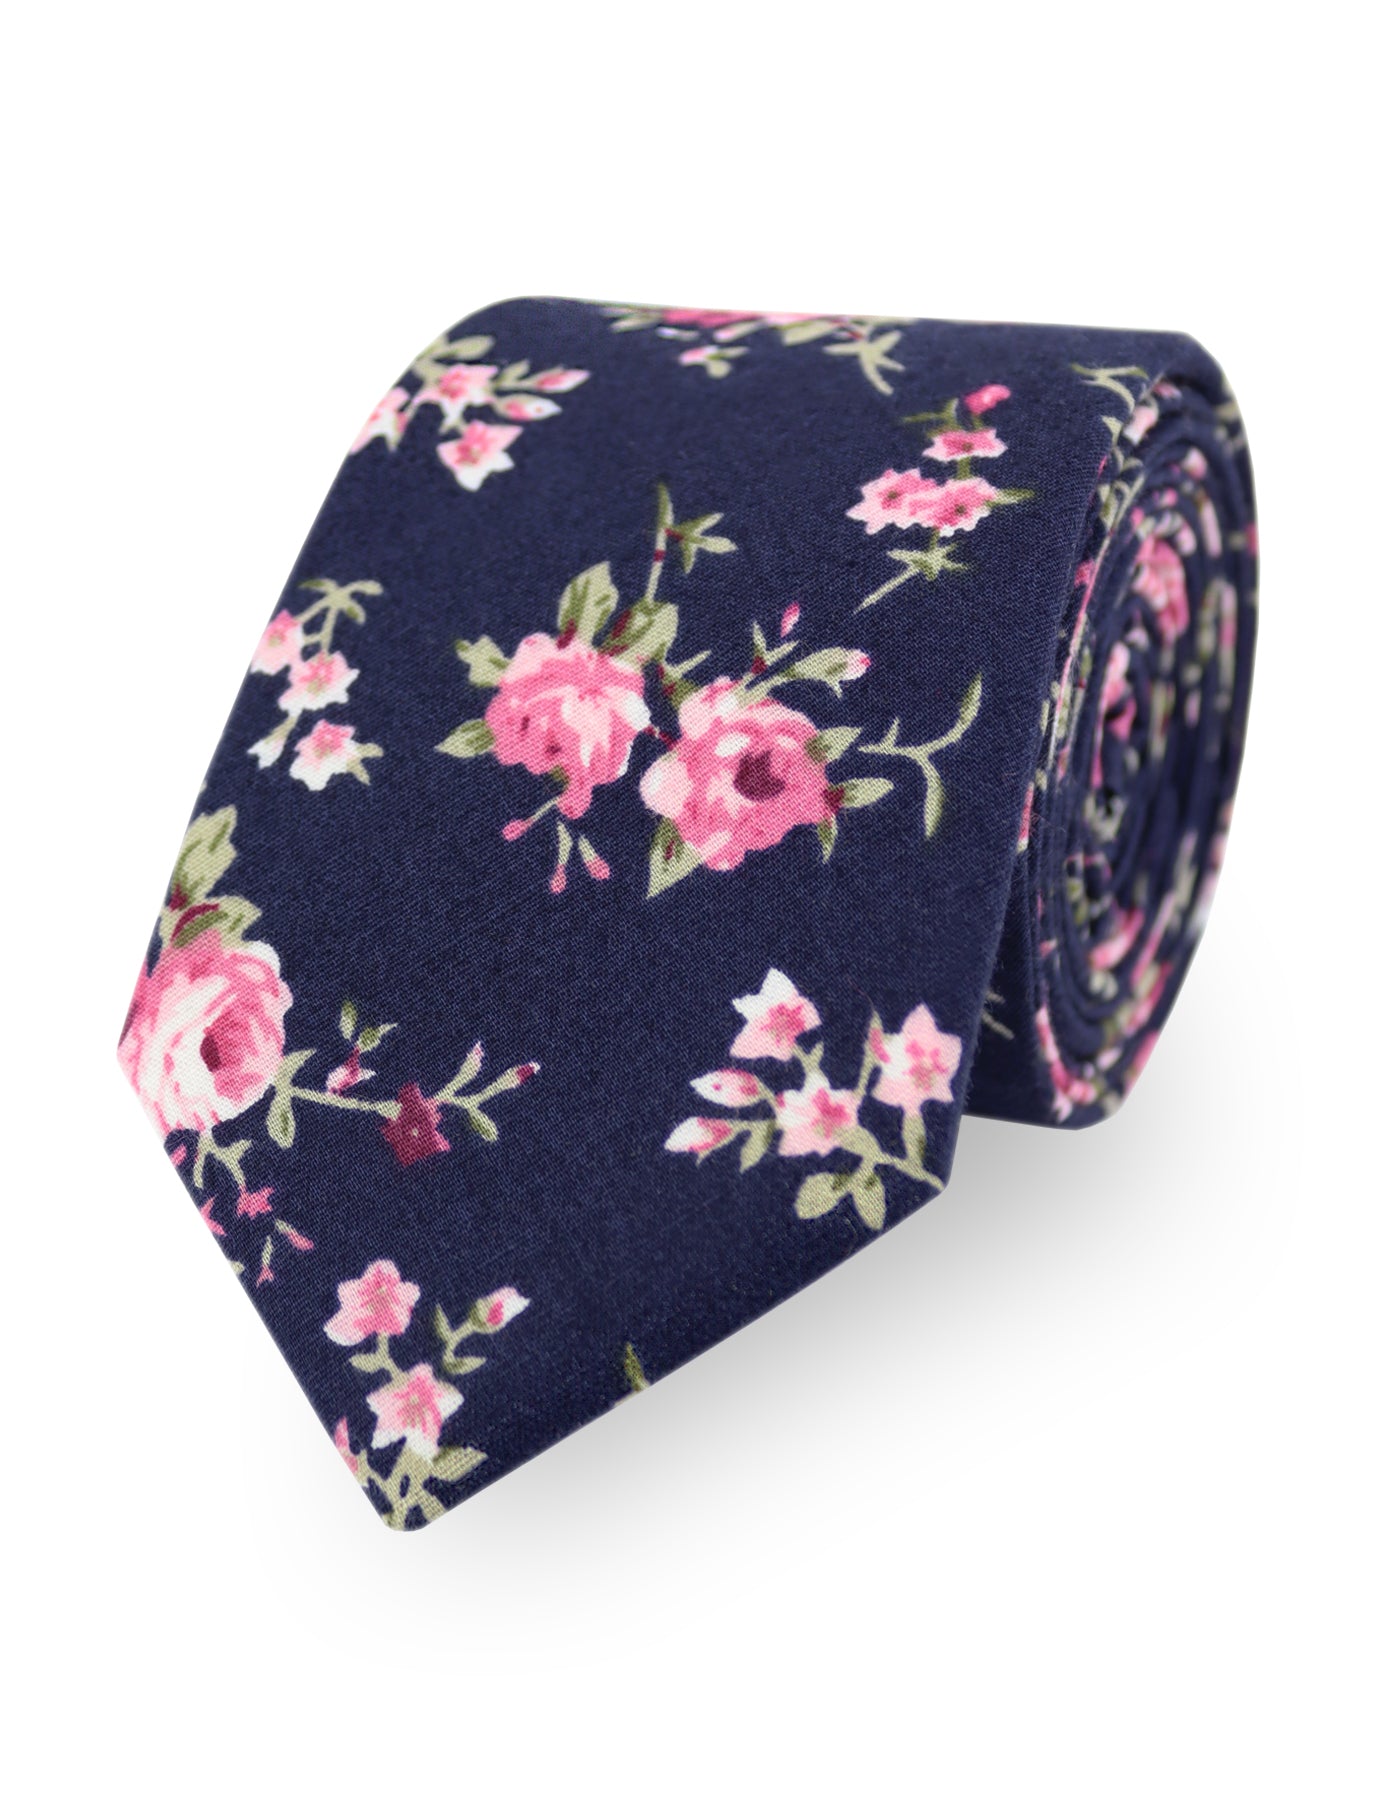 100% Cotton Floral Print Bow Tie - Navy Blue & Pink